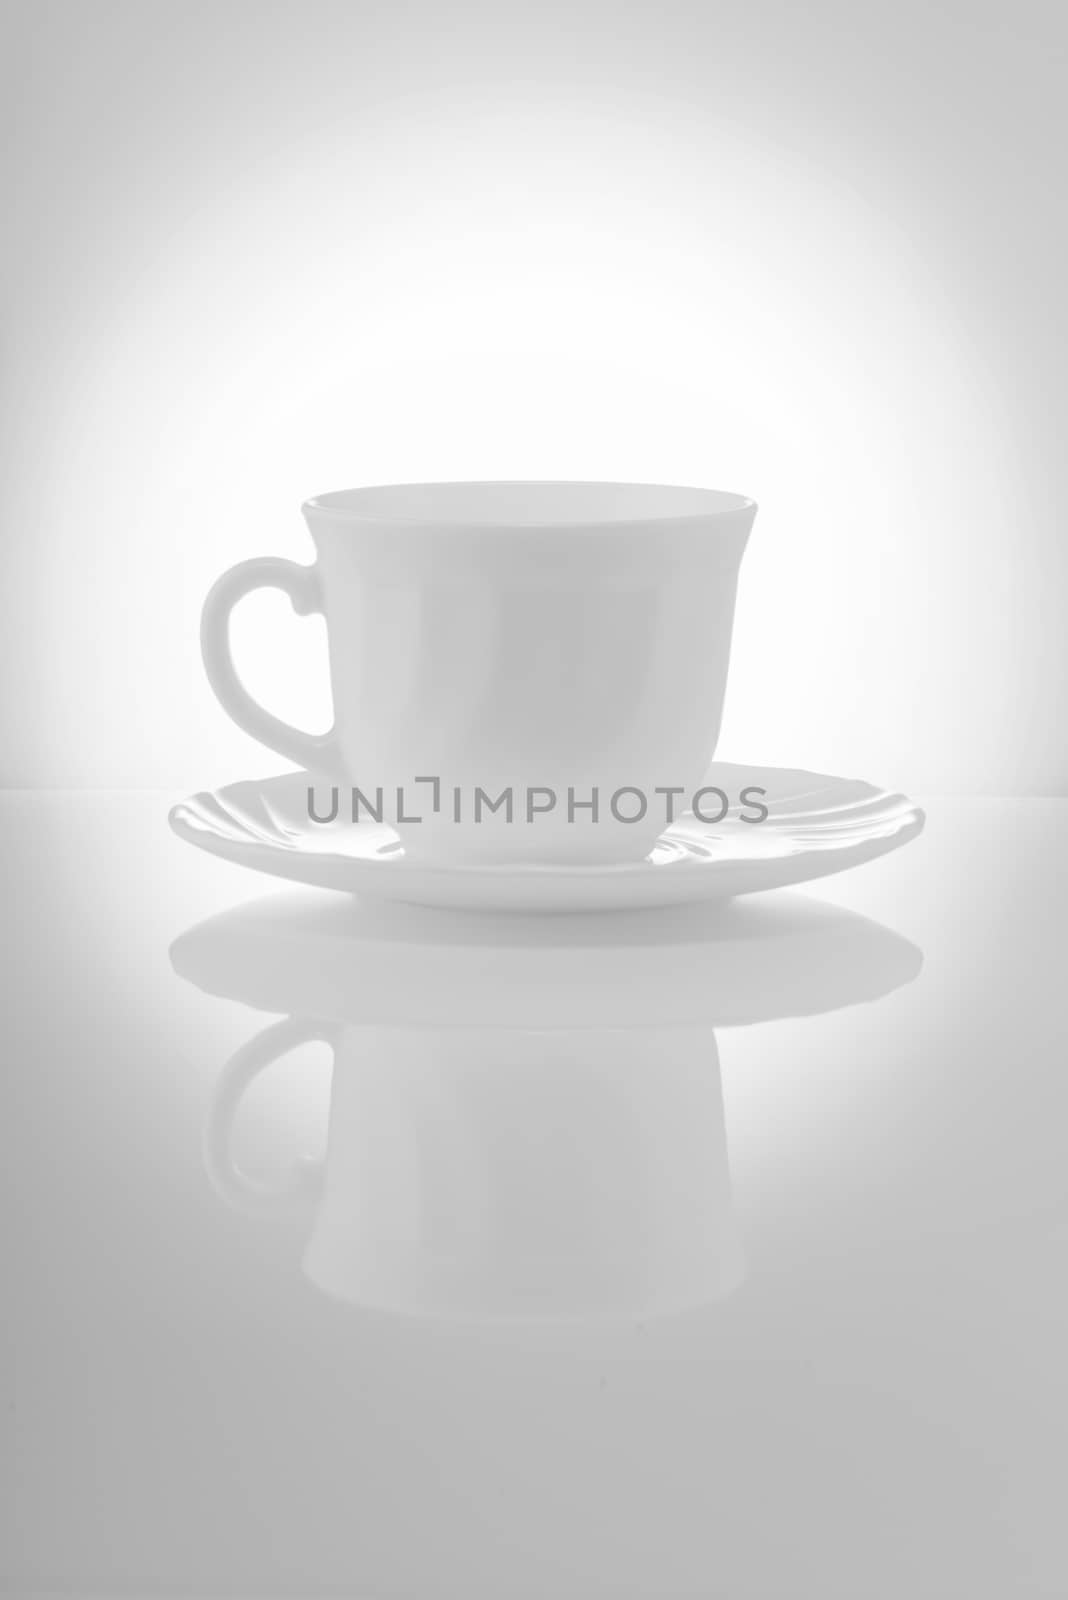 Cups for tea on a white background by fotooxotnik